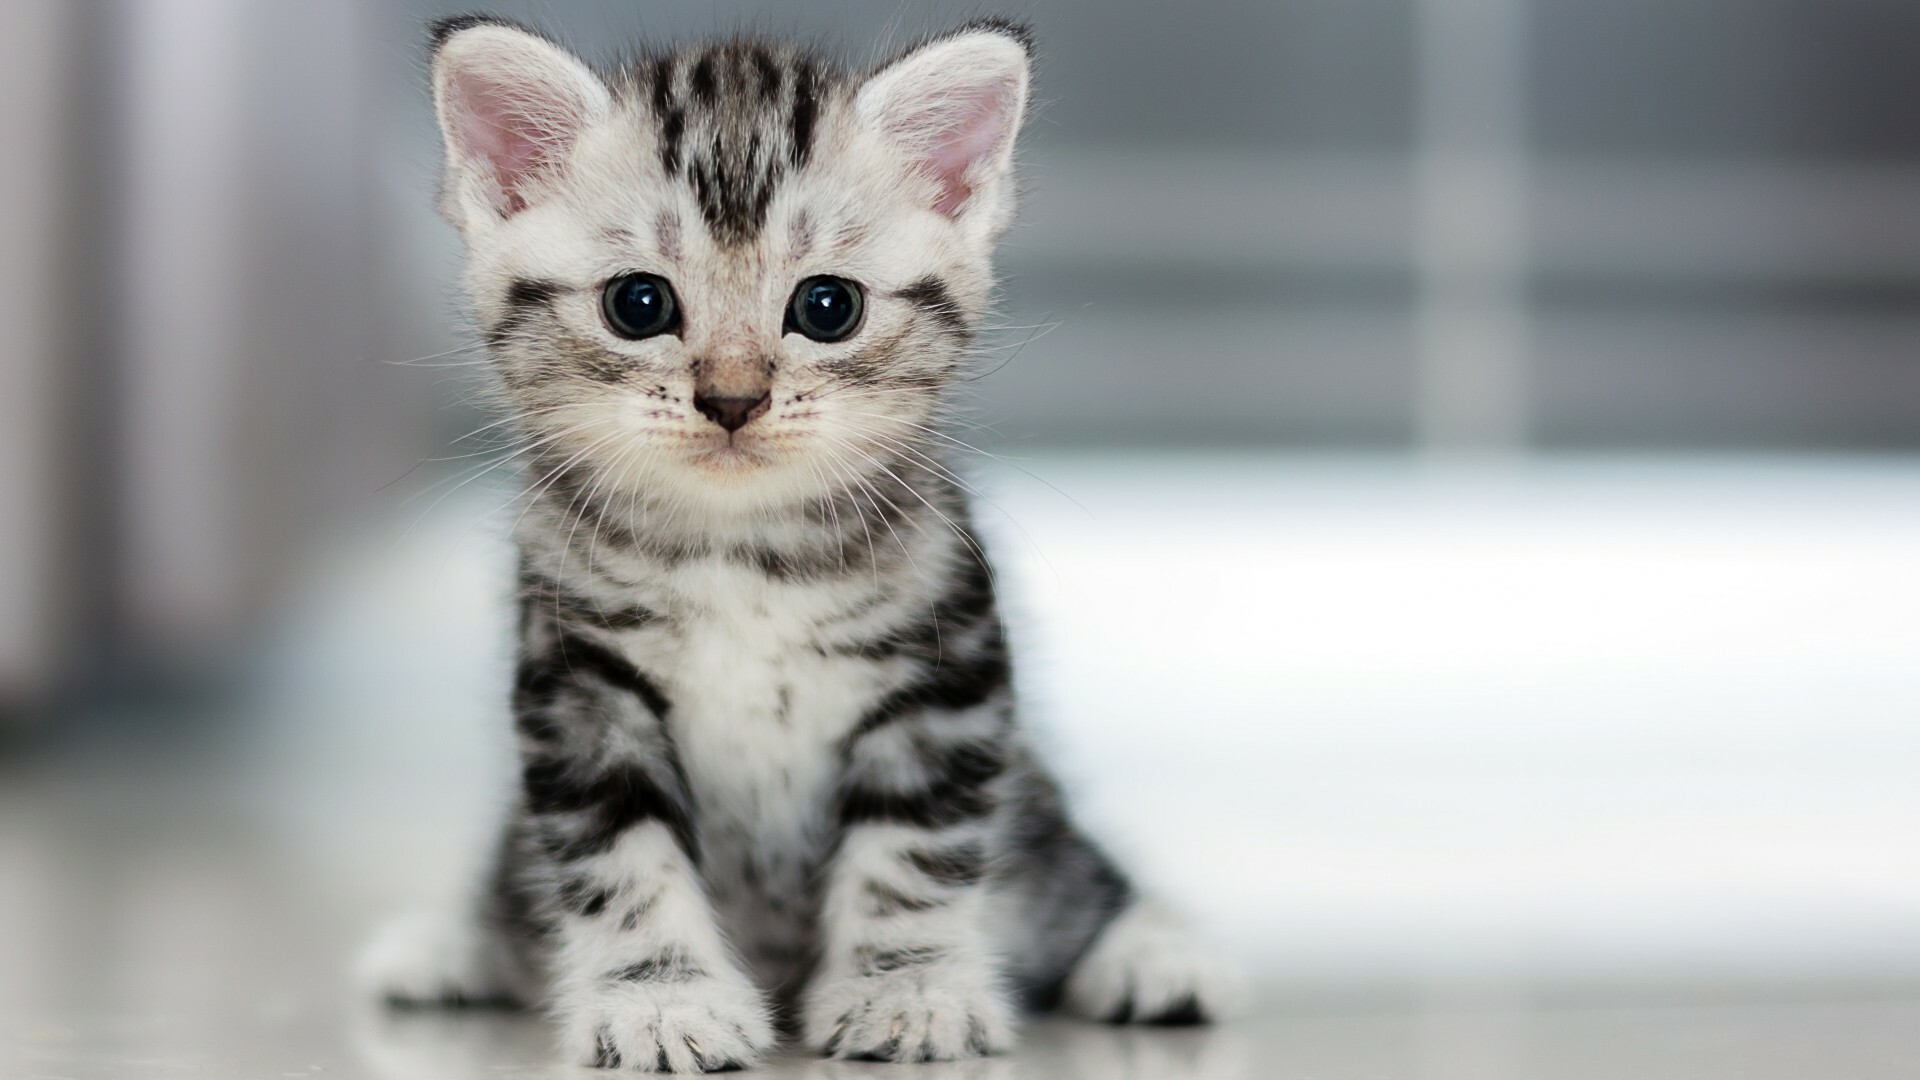 Kitten cat wallpaper, Sweet and innocent, Playful and curious, Purrfectly adorable, 1920x1080 Full HD Desktop